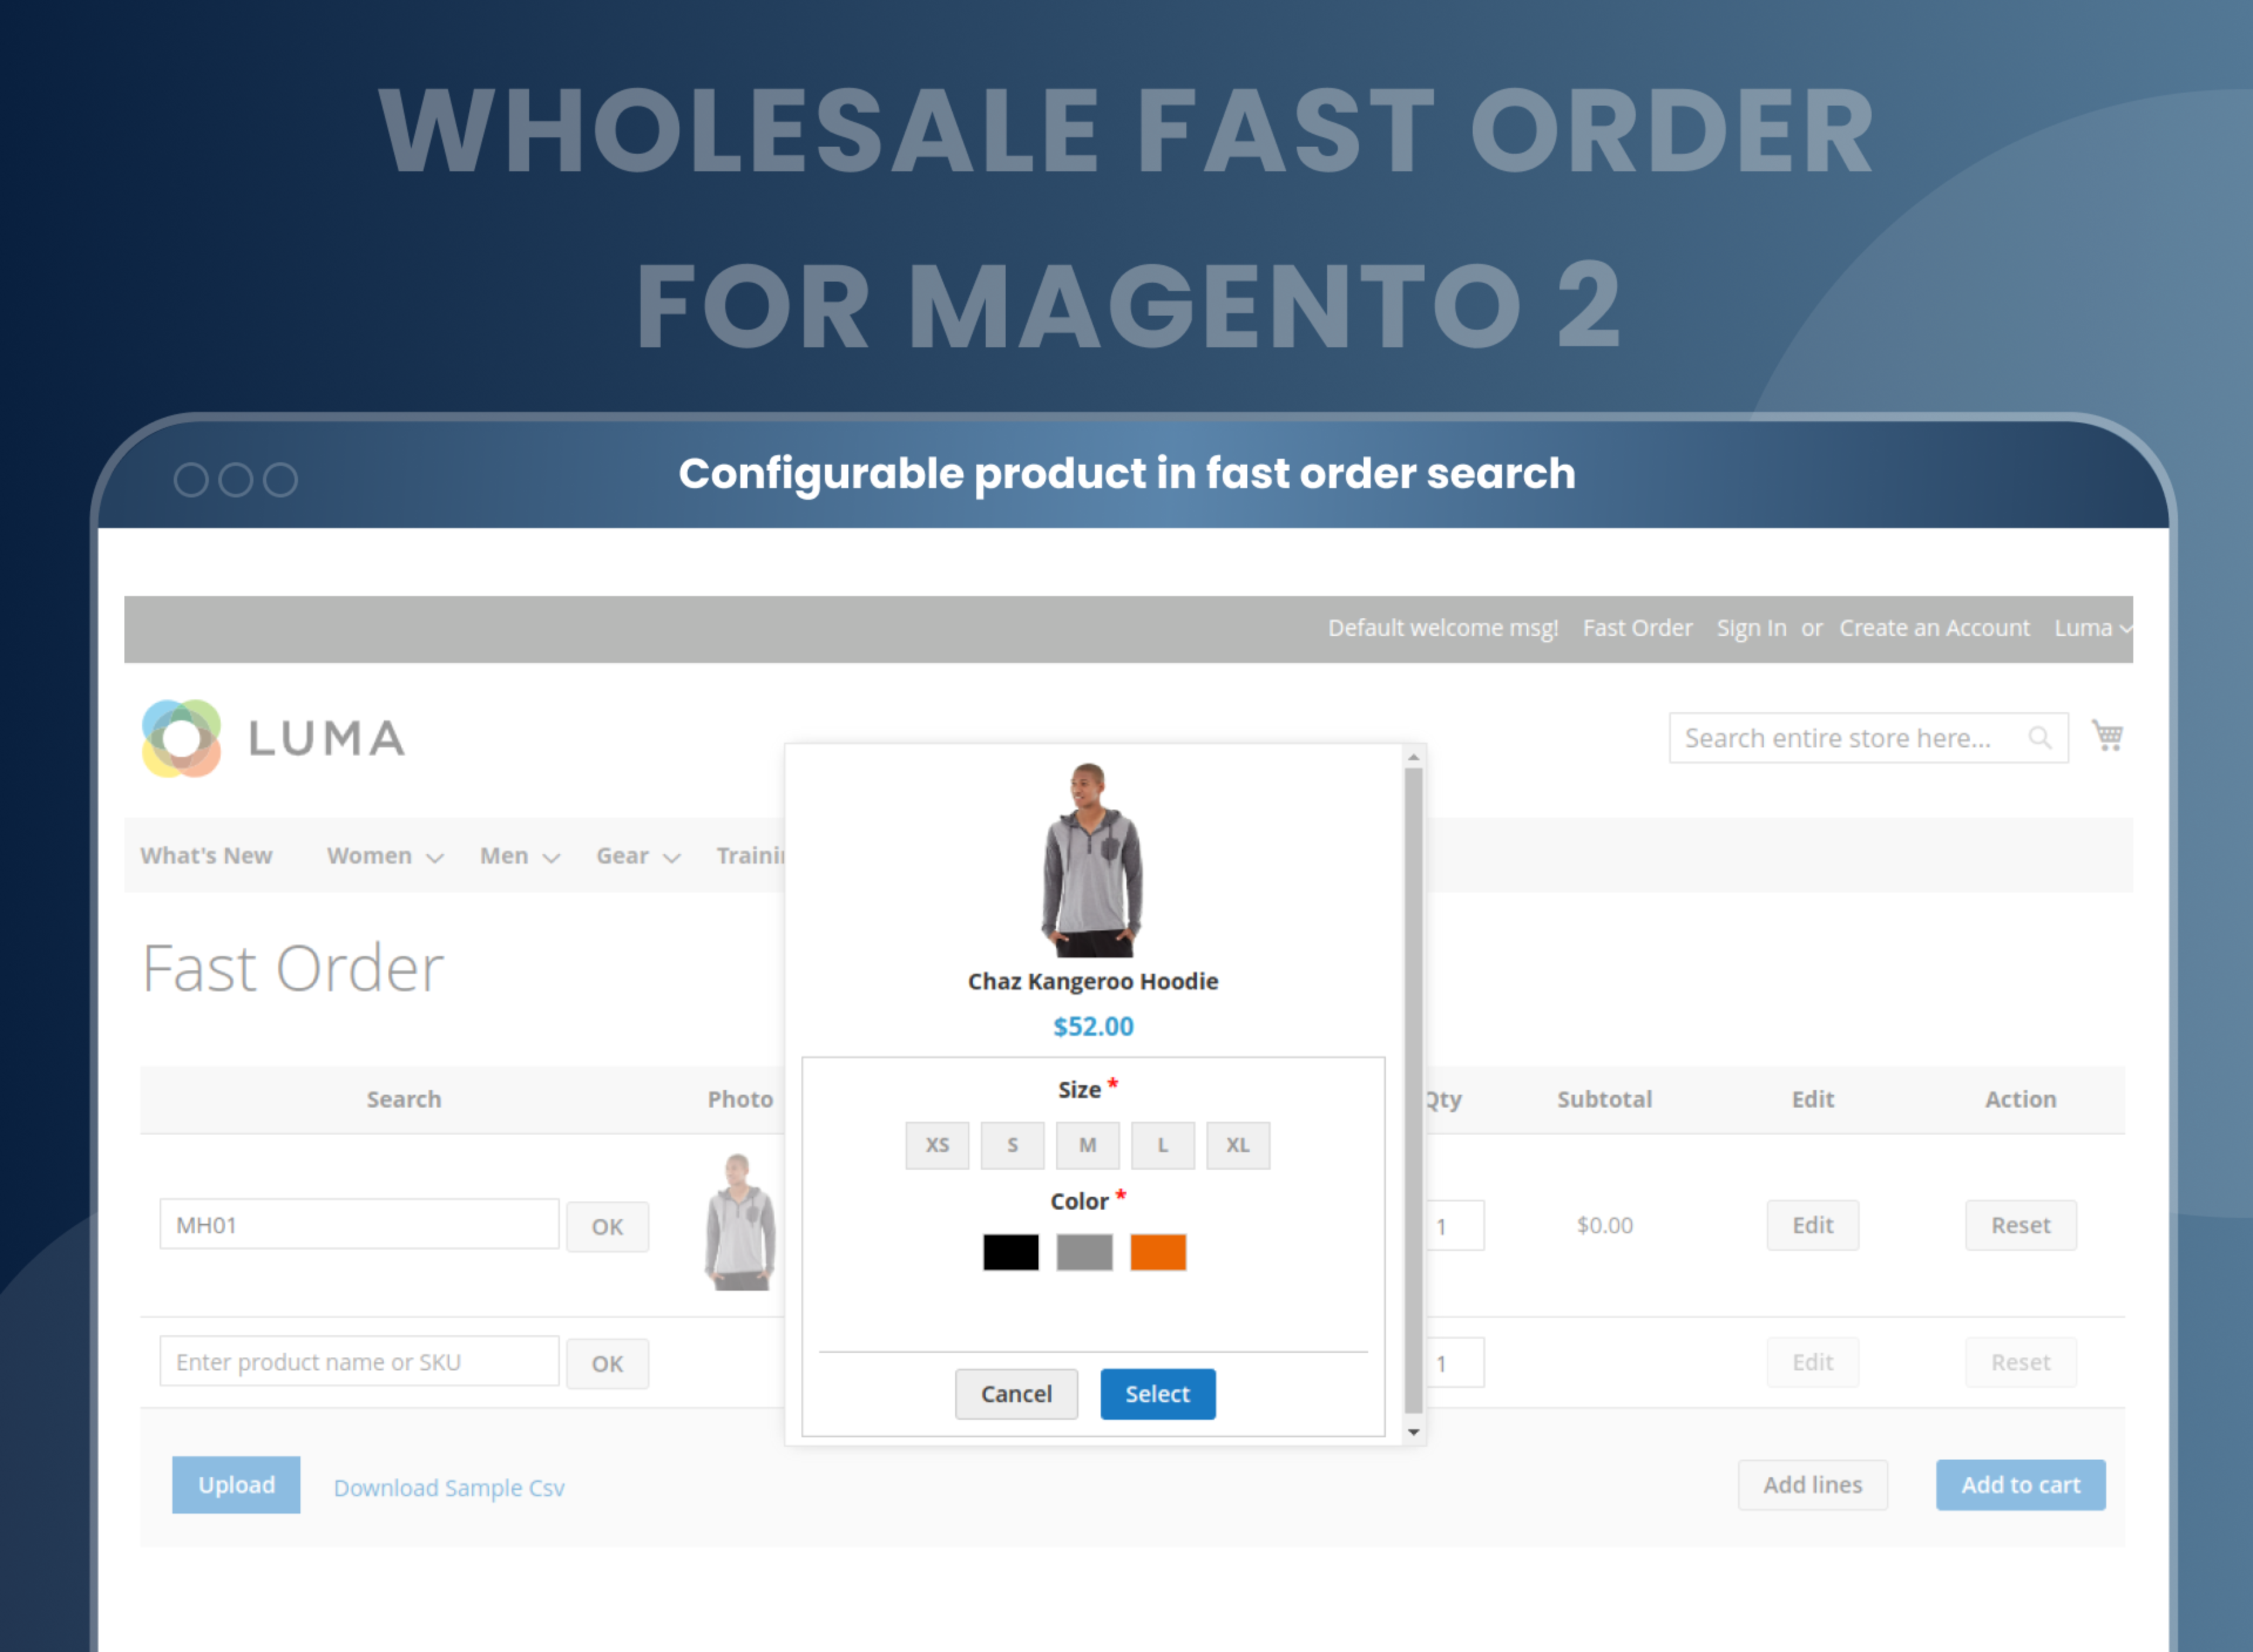 Configurable product in fast order search